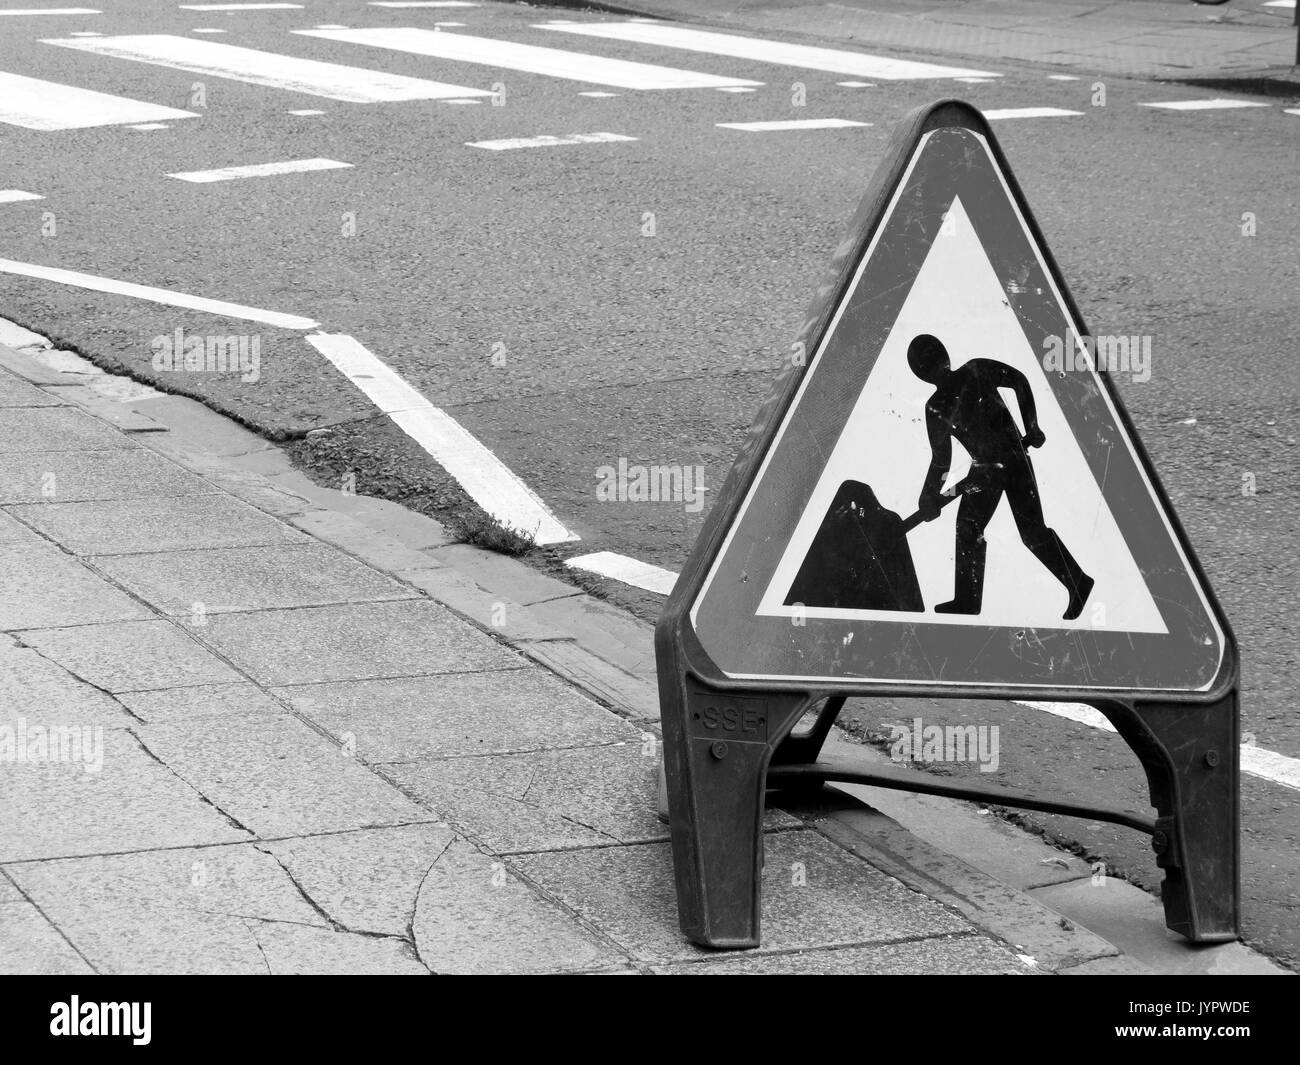 Roadworks Black and White Stock Photos & Images - Alamy